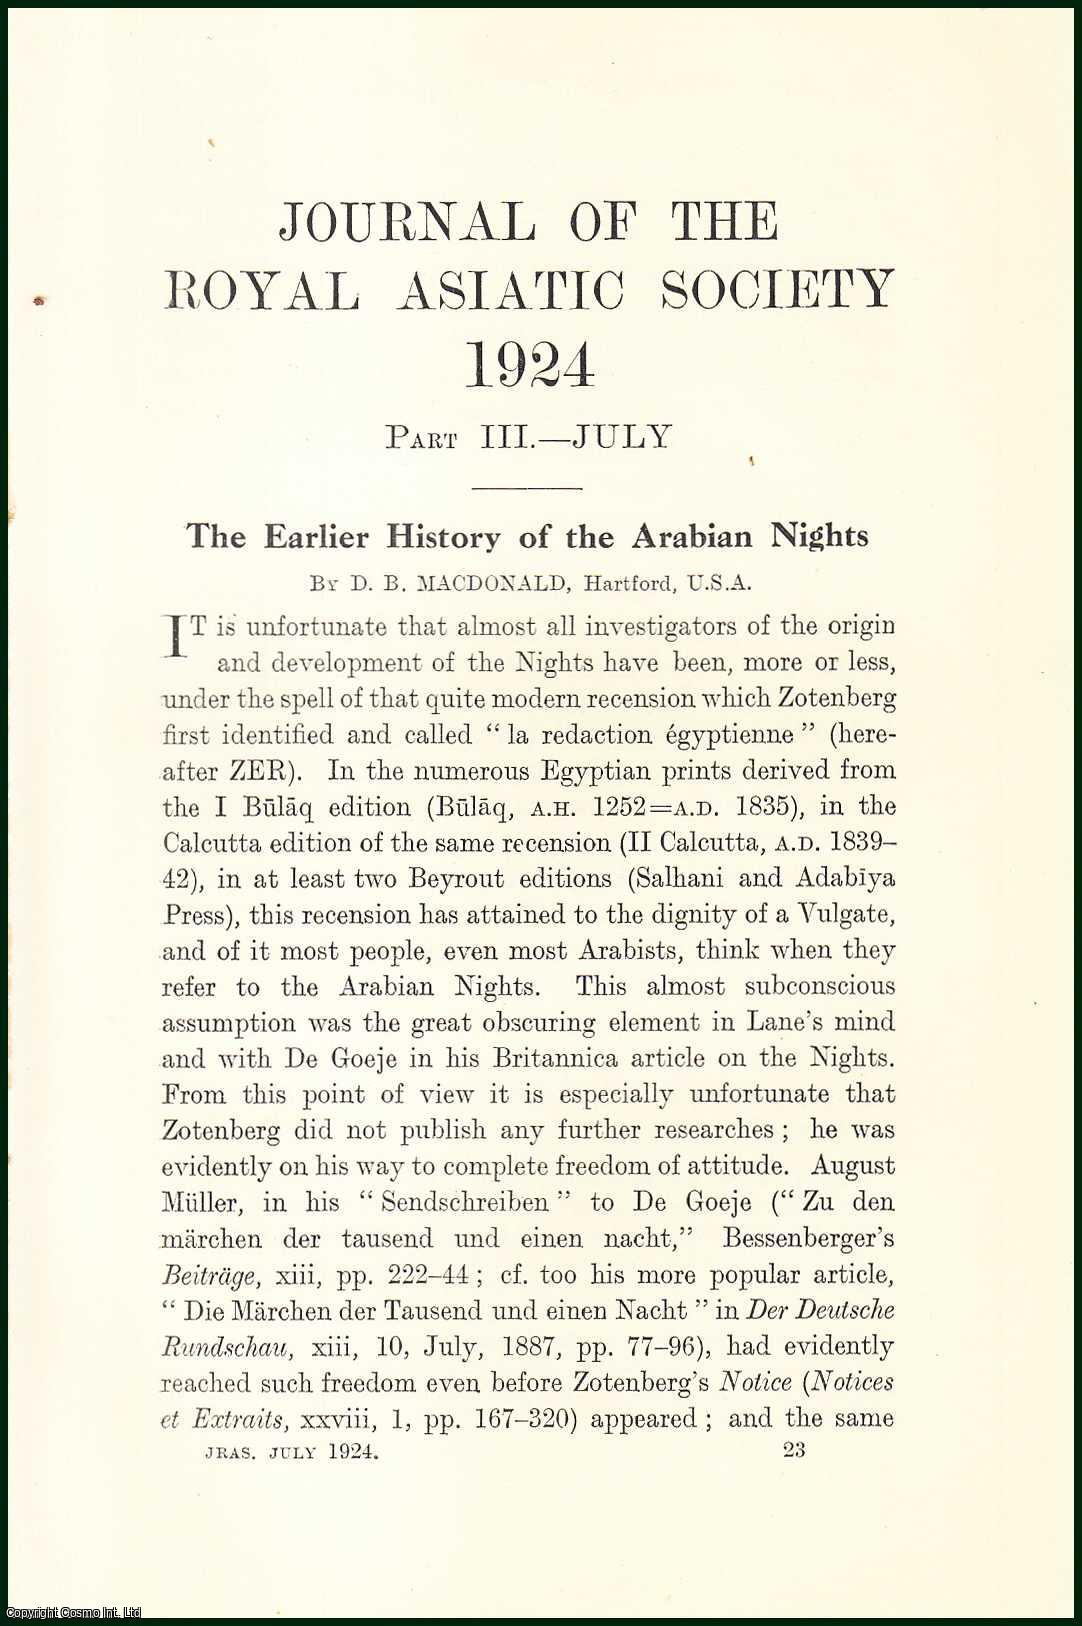 D.B. Macdonald, Hartford, U.S.A. - The Earlier History of The Arabian Nights. An uncommon original article from the Royal Asiatic Society , 1924.